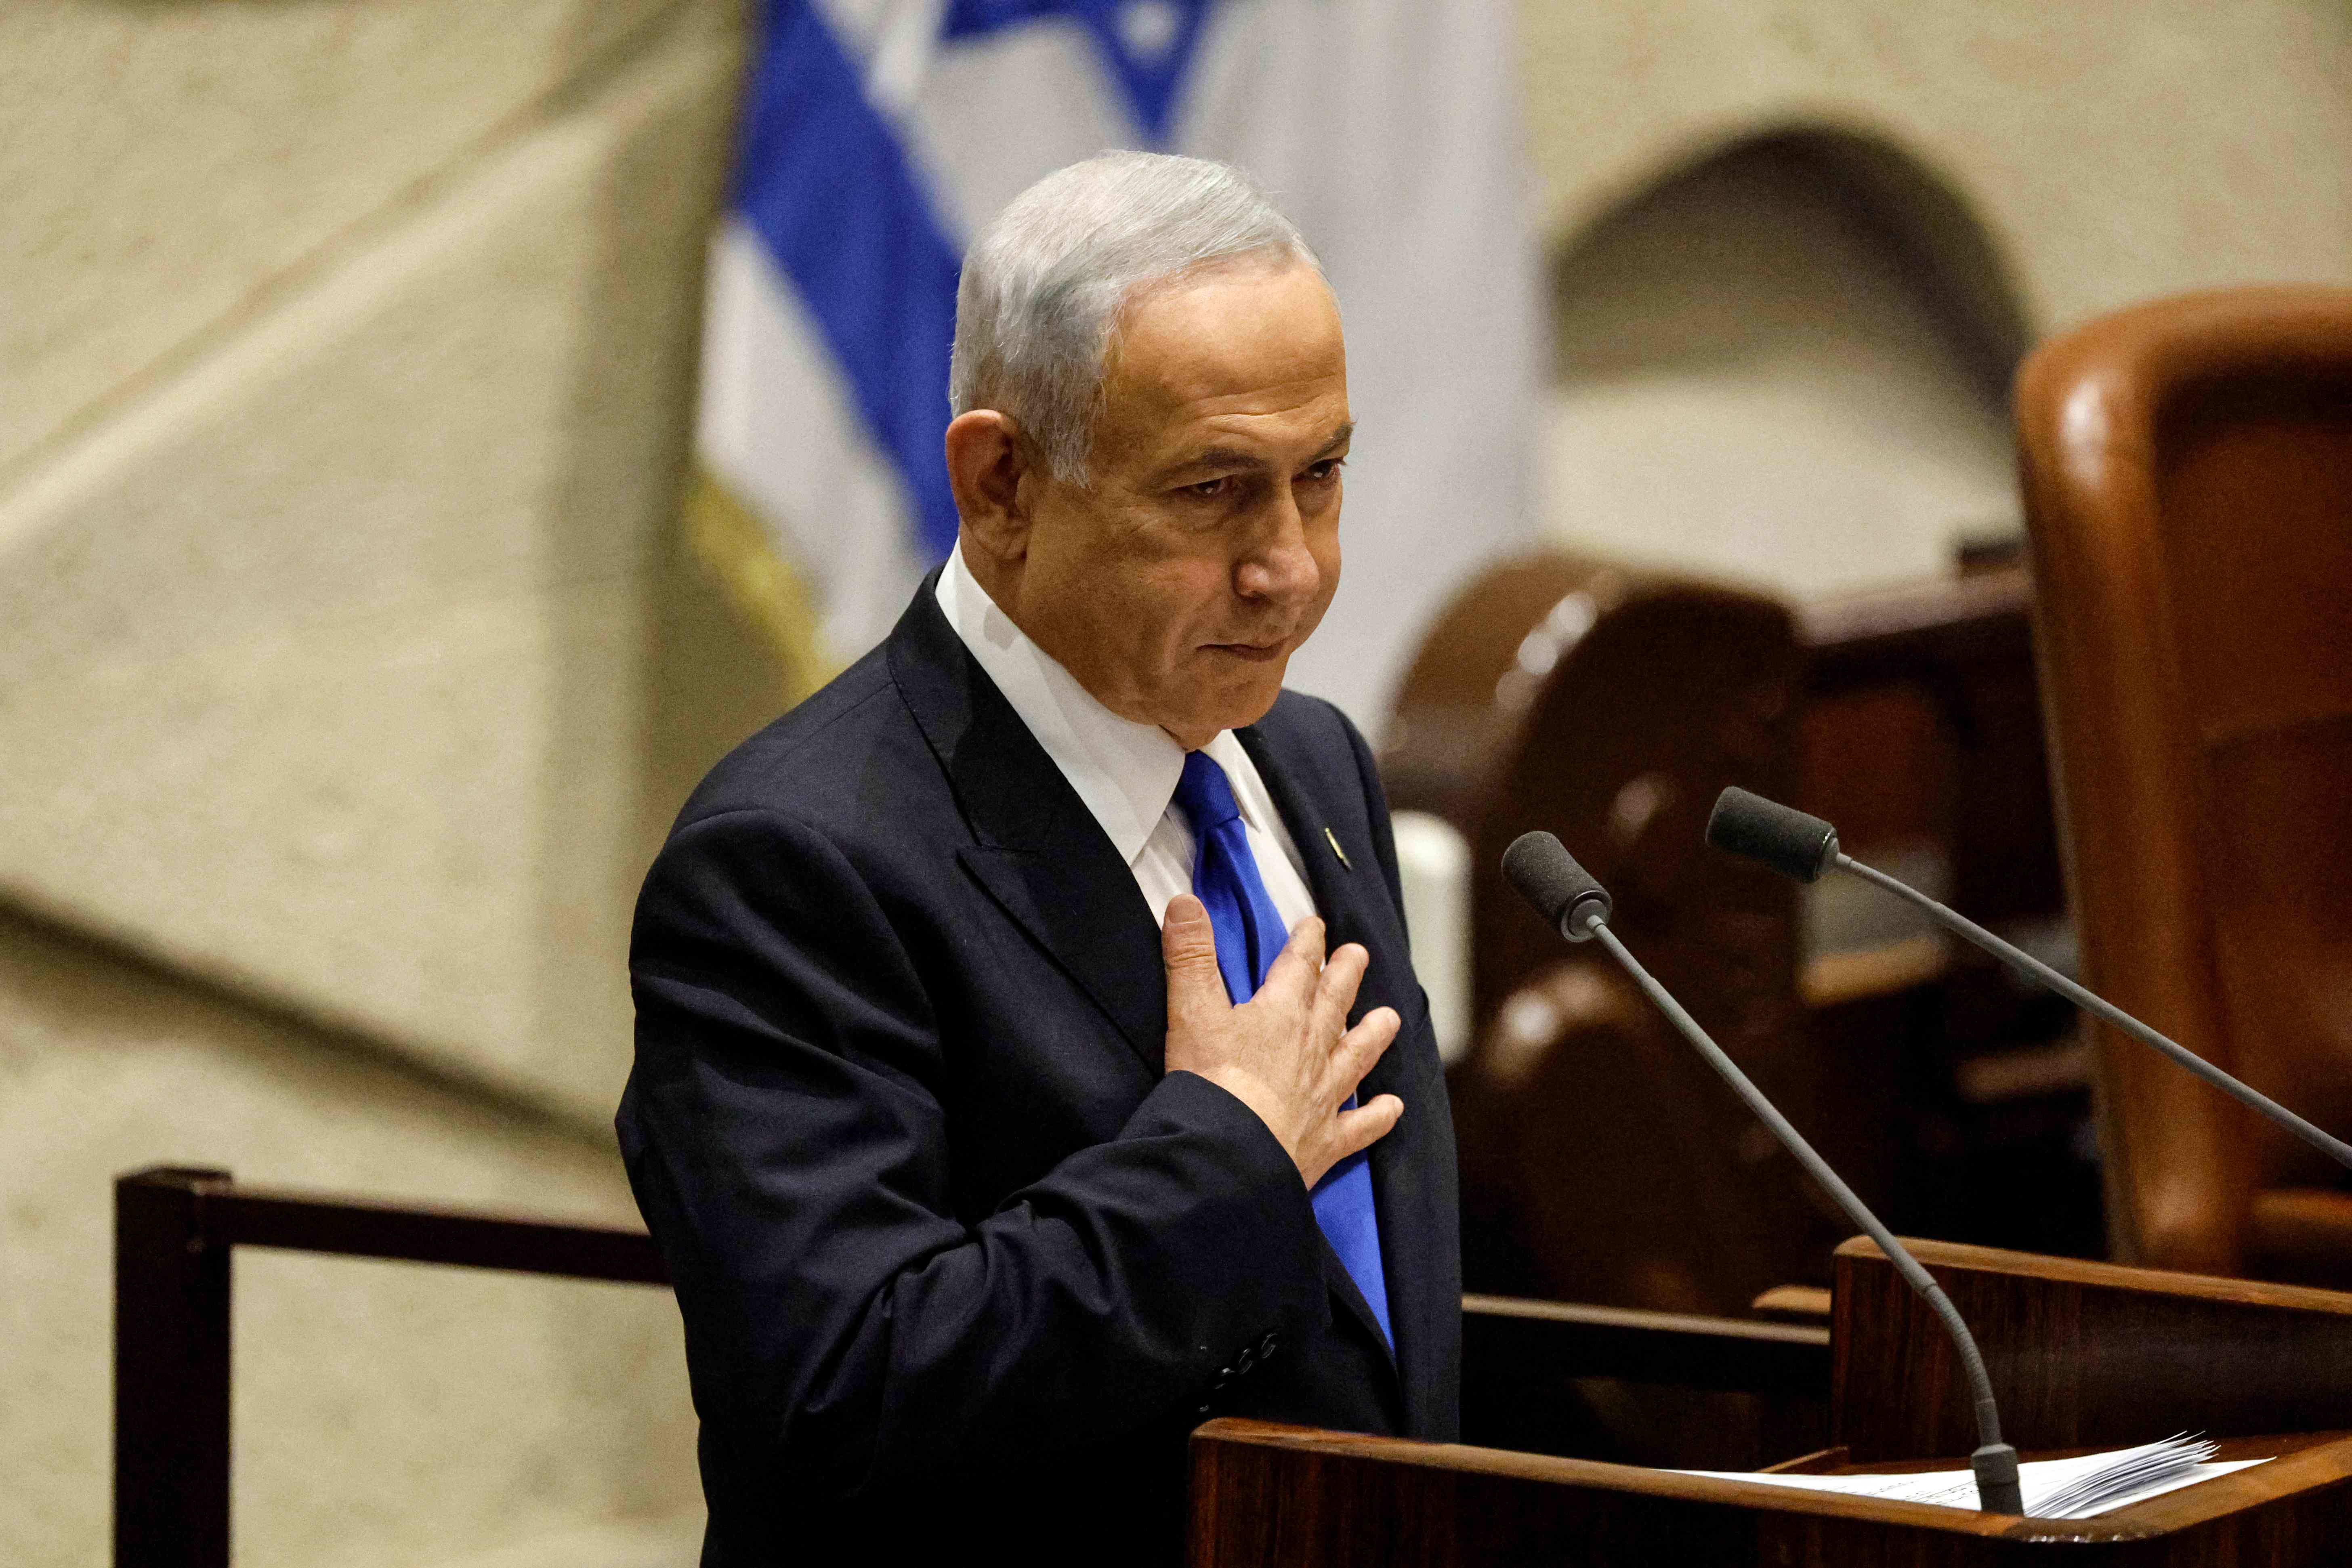 Benjamin Netanyahu presents the new government to parliament at the Knesset